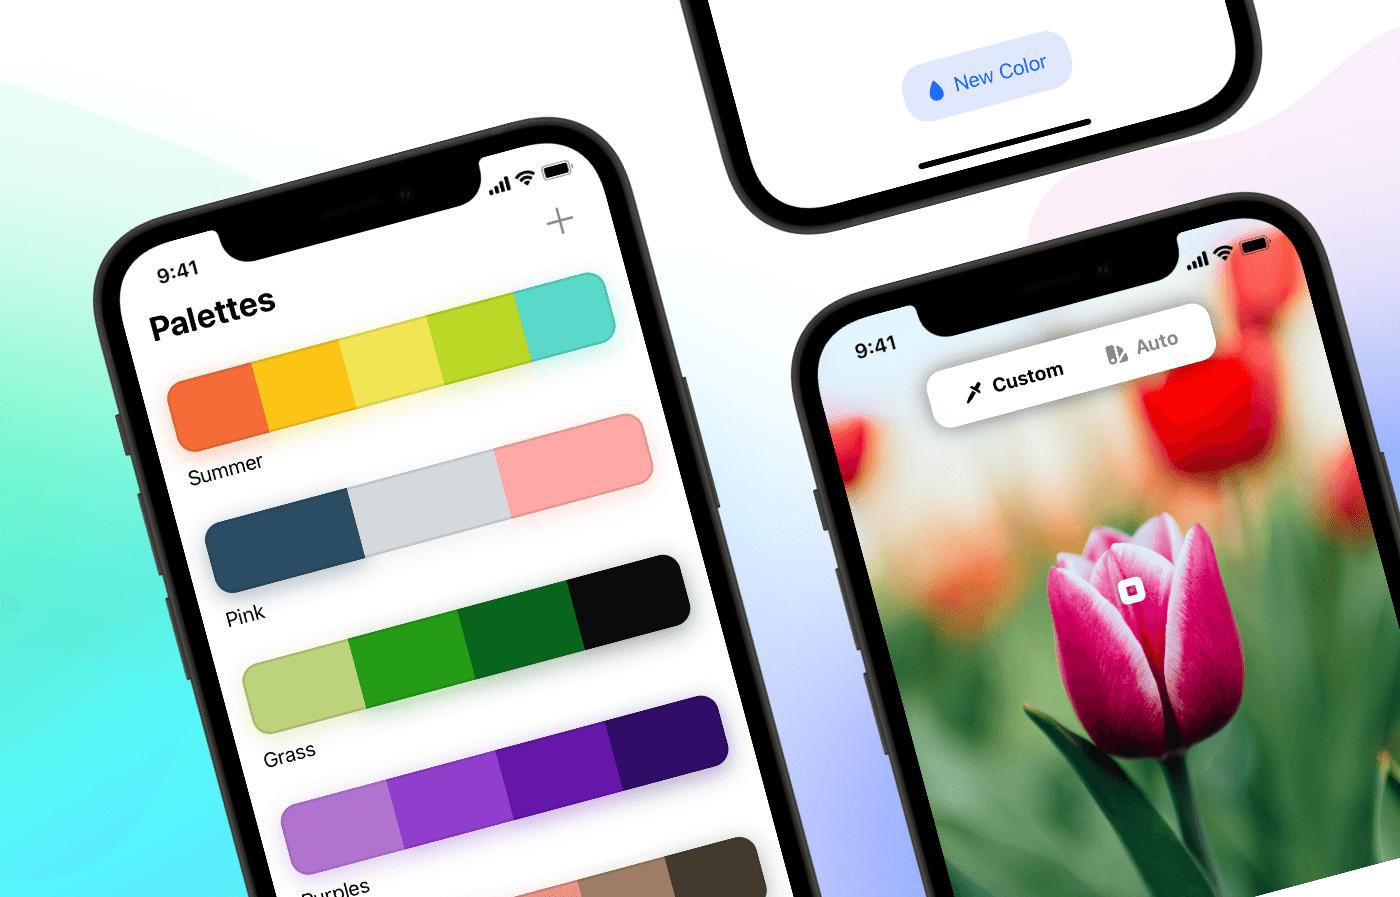 ColorSlurp, now the best color picker for iOS!